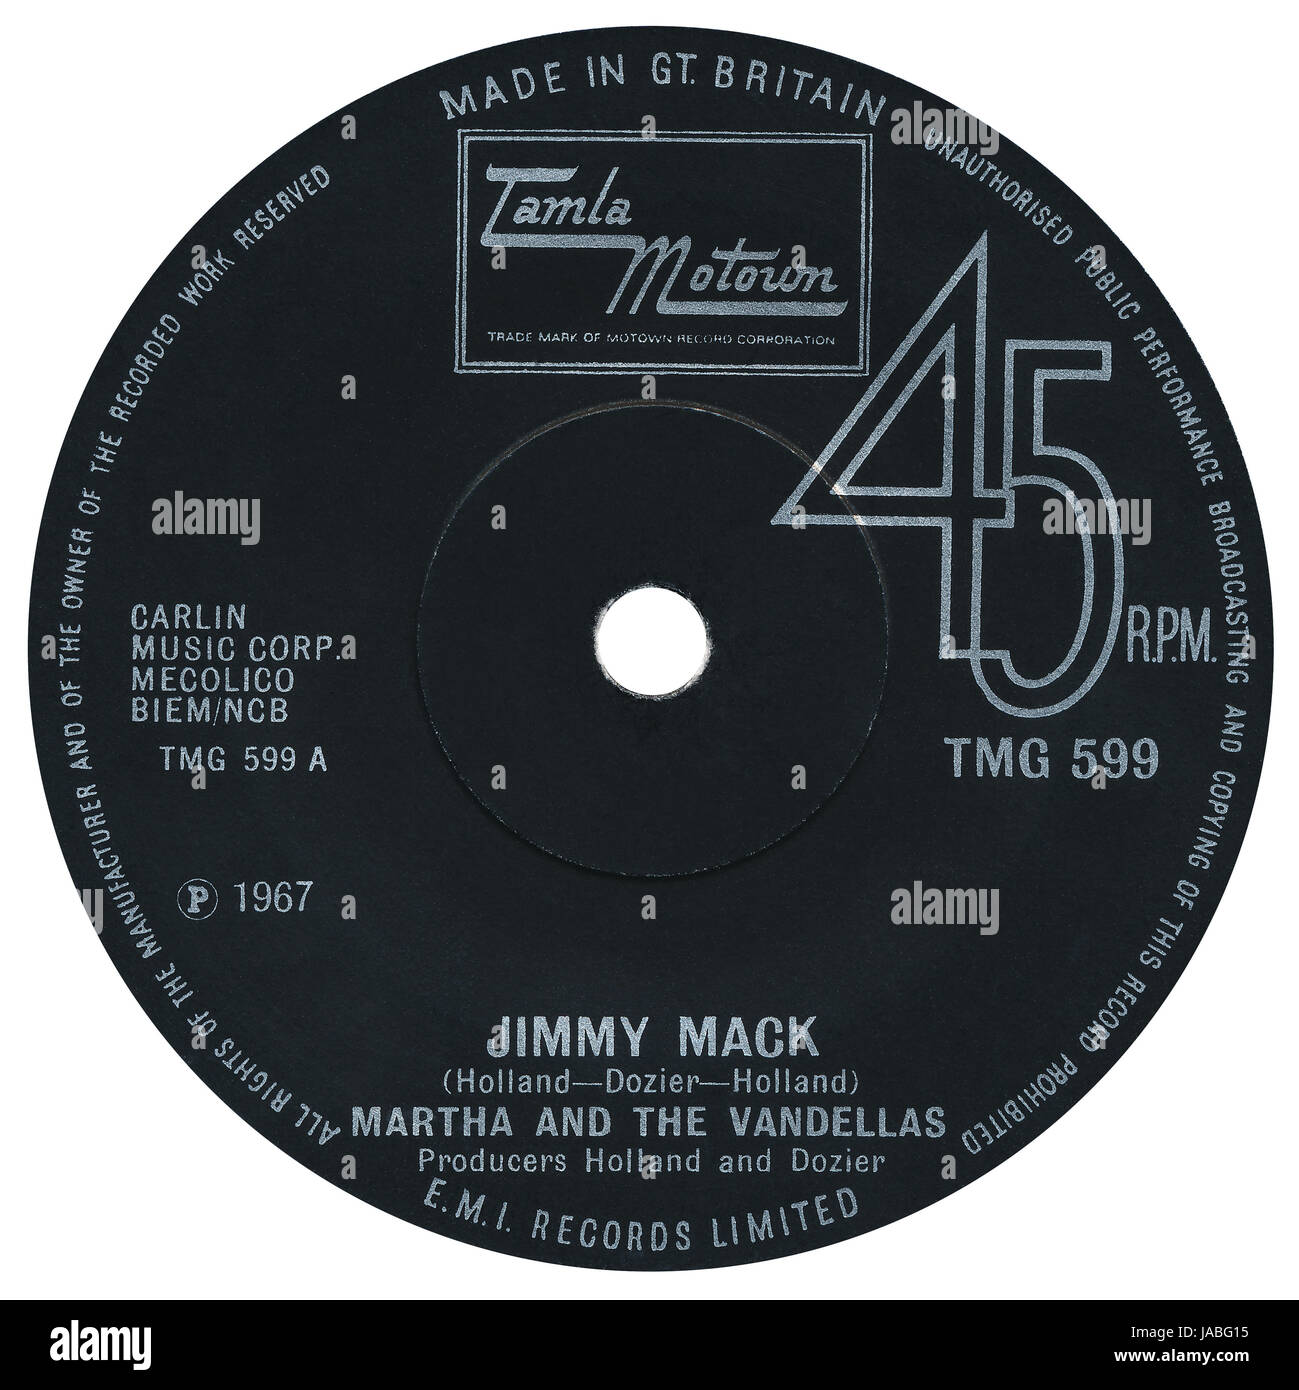 45 RPM 7' UK record label of Jimmy Mack by Martha and the Vandellas on the Tamla Motown label from 1967. Stock Photo